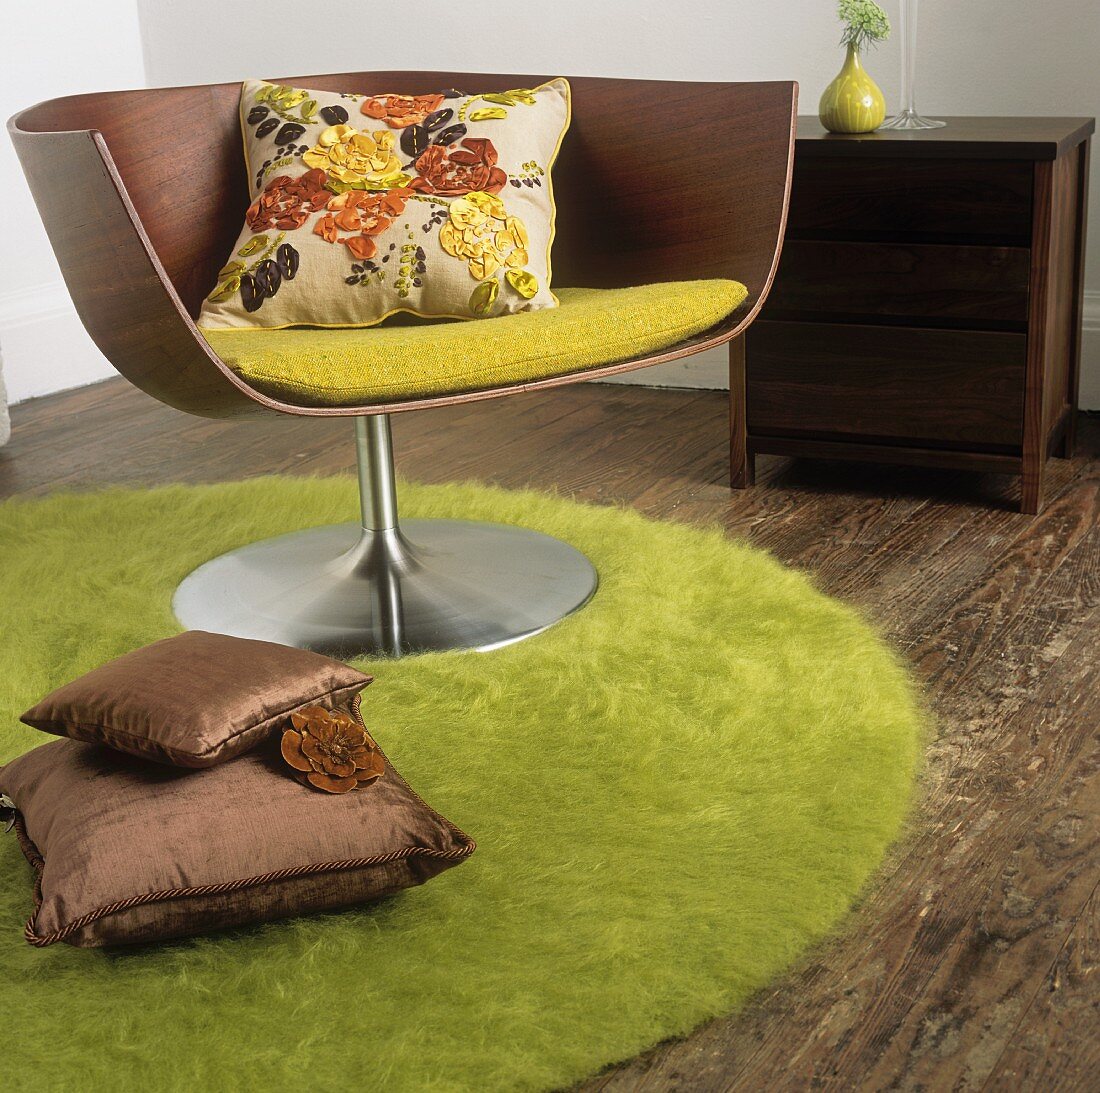 A wooden swivel chair on a round green rug